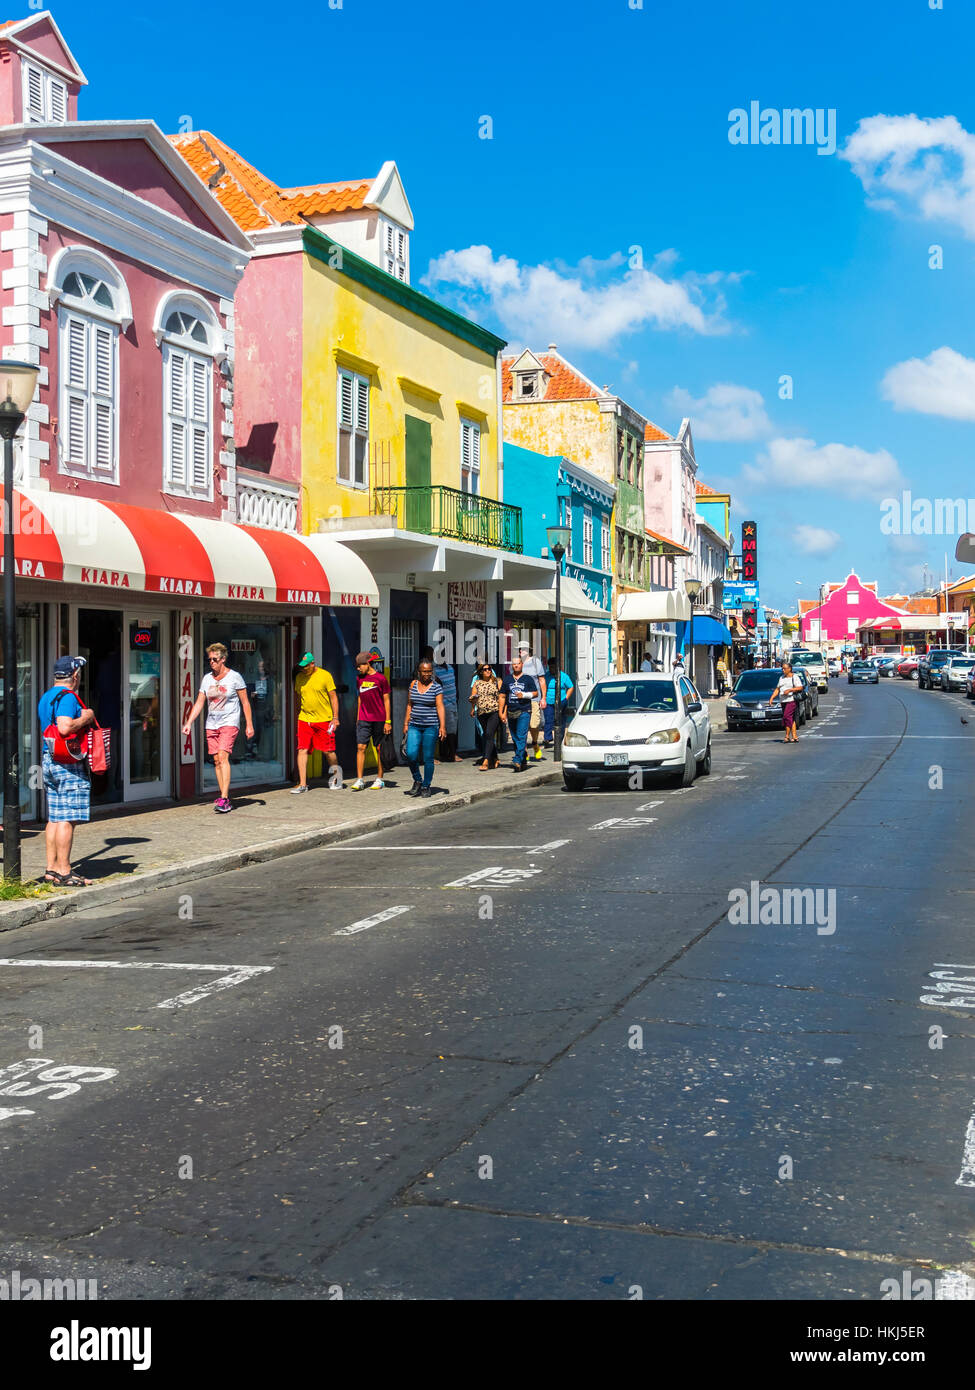 Colorful row of houses in Dutch-Caribbean colonial style, shopping street, Alley district, Willemstad, Caribbean, Curacao Stock Photo